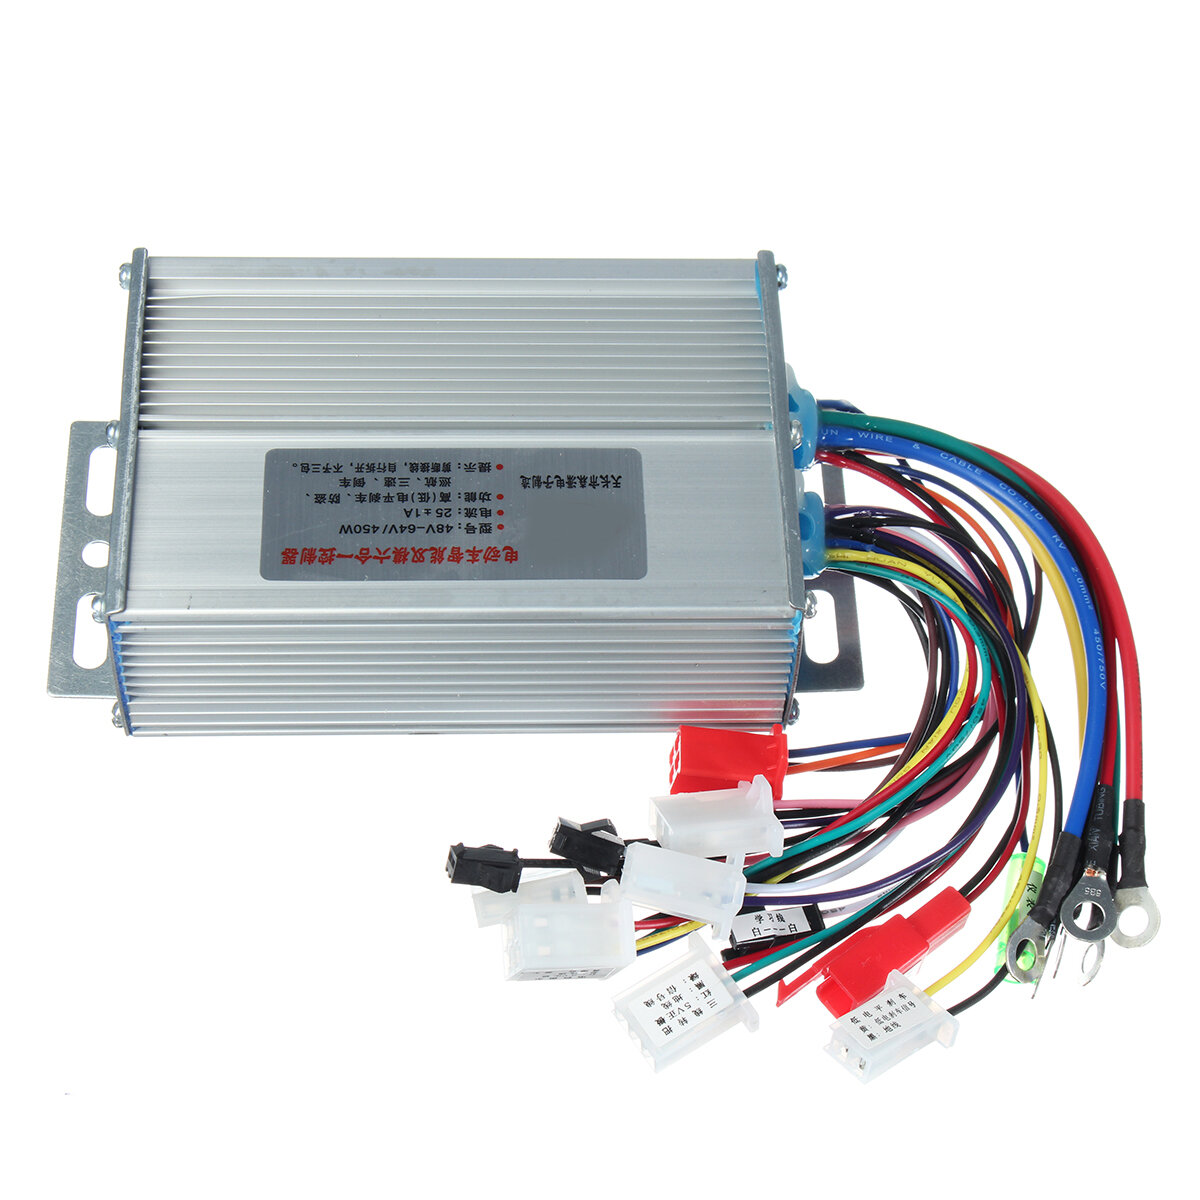 

DC 48V-64V 20A 450W Scooter E-bike Electric Bicycle Brushless Sine Wave Motor Speed Controller